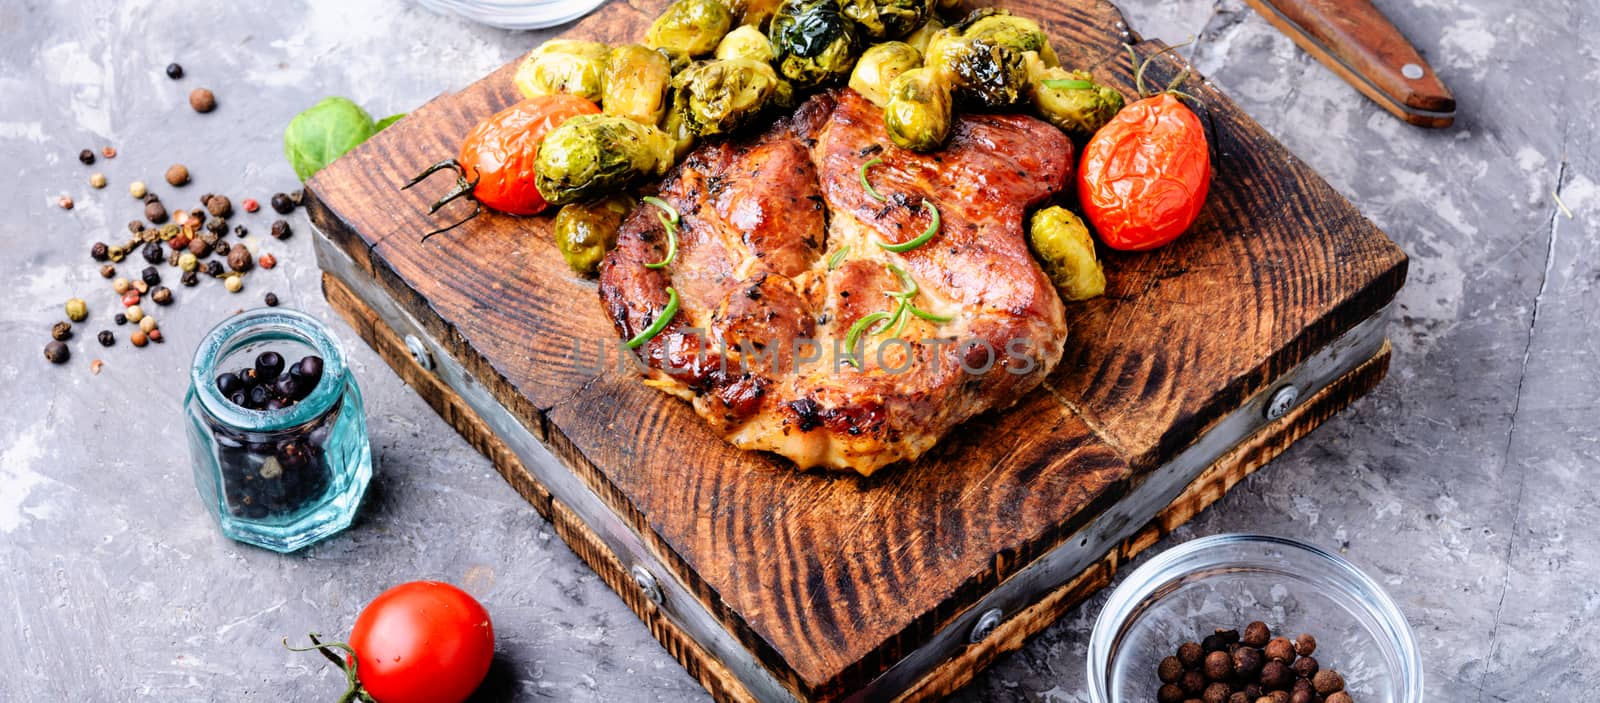 Grilled meat steak with vegetables on the kitchen board. Grilled meat with Brussels sprouts